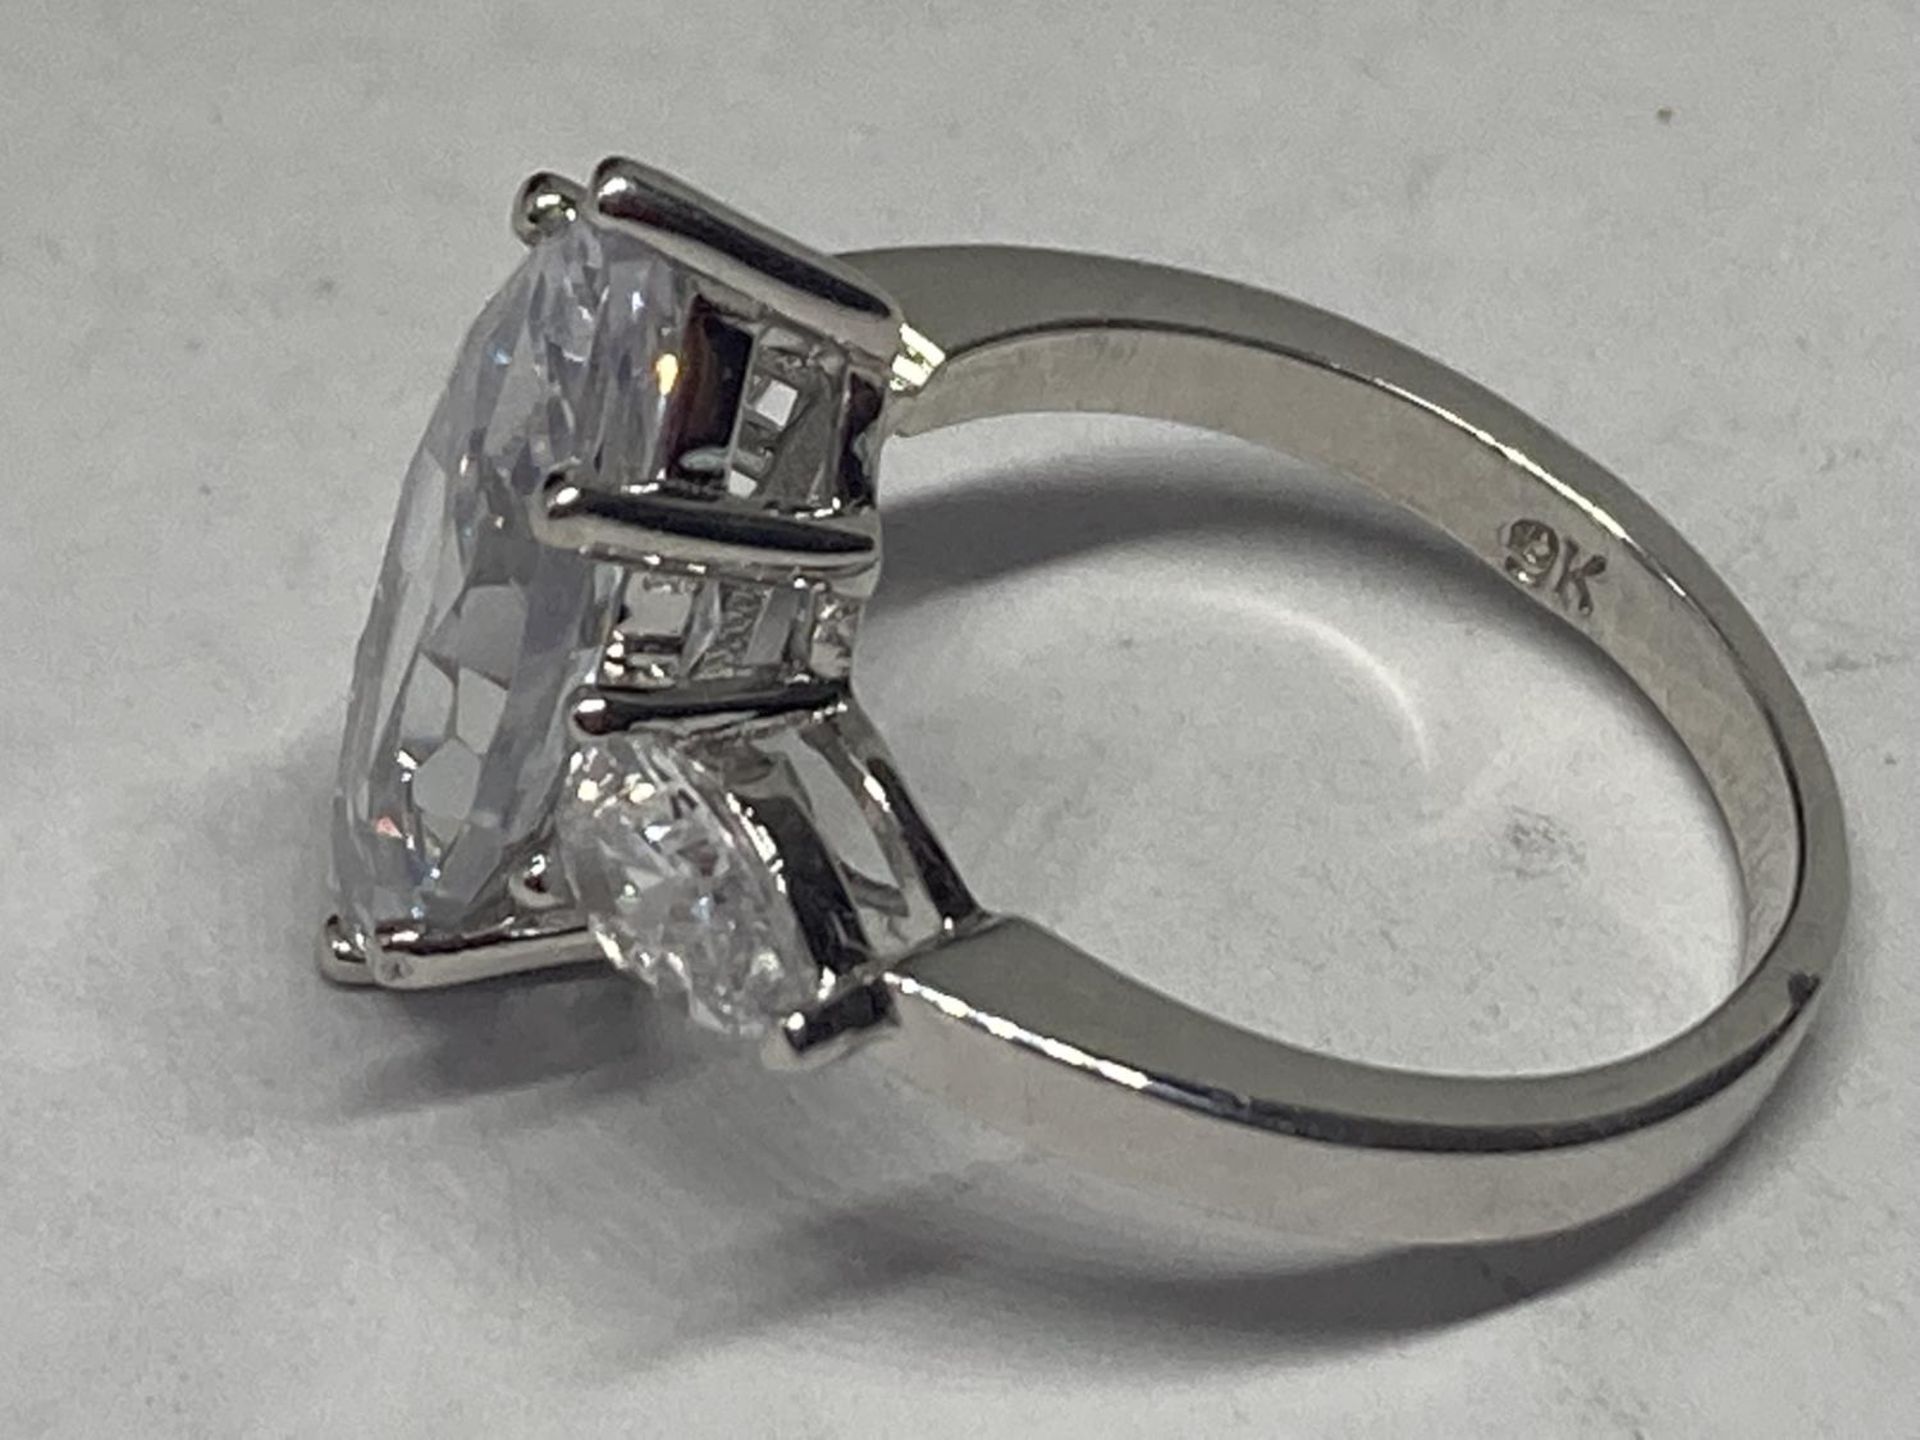 A MARKED 9K RING WITH 5 CARATS OF MOISSANITE SIZE L/M GROSS WEIGHT 4.85 GRAMS - Image 2 of 3